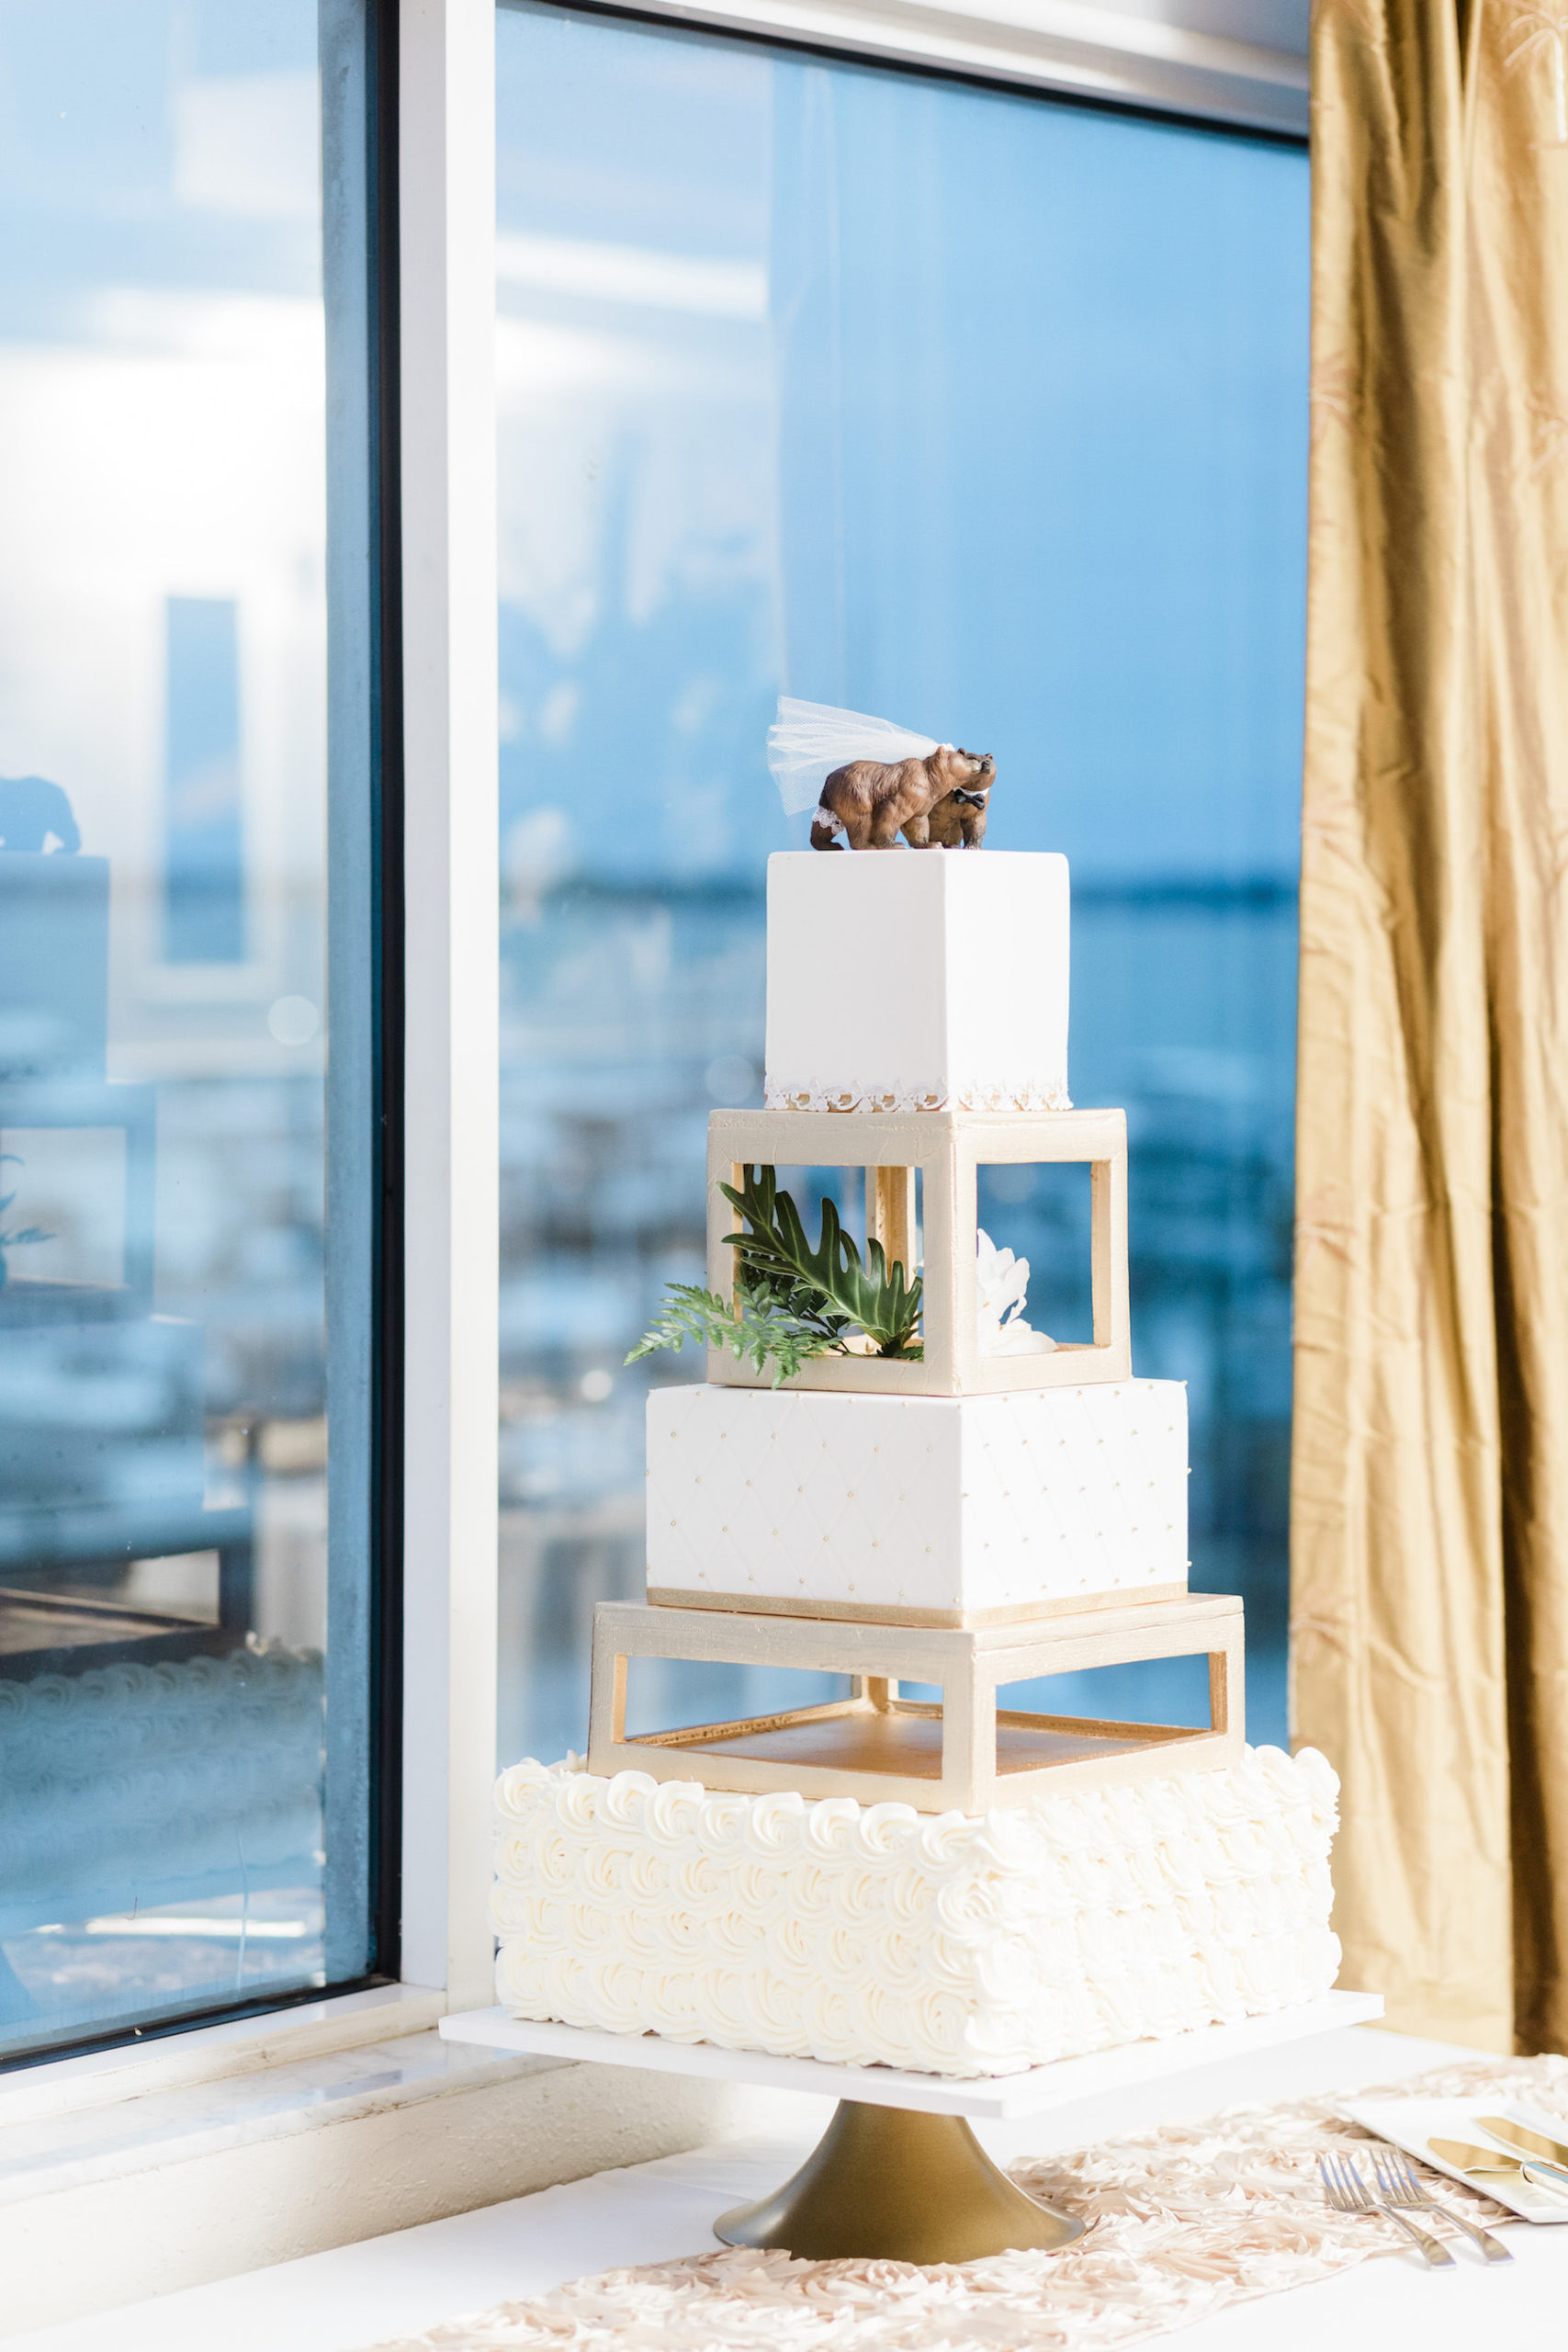 Modern Five Tier Square Wedding Cake with Gold Risers Stands and Bear Cake Topper | St. Pete Wedding Baker The Artistic Whisk